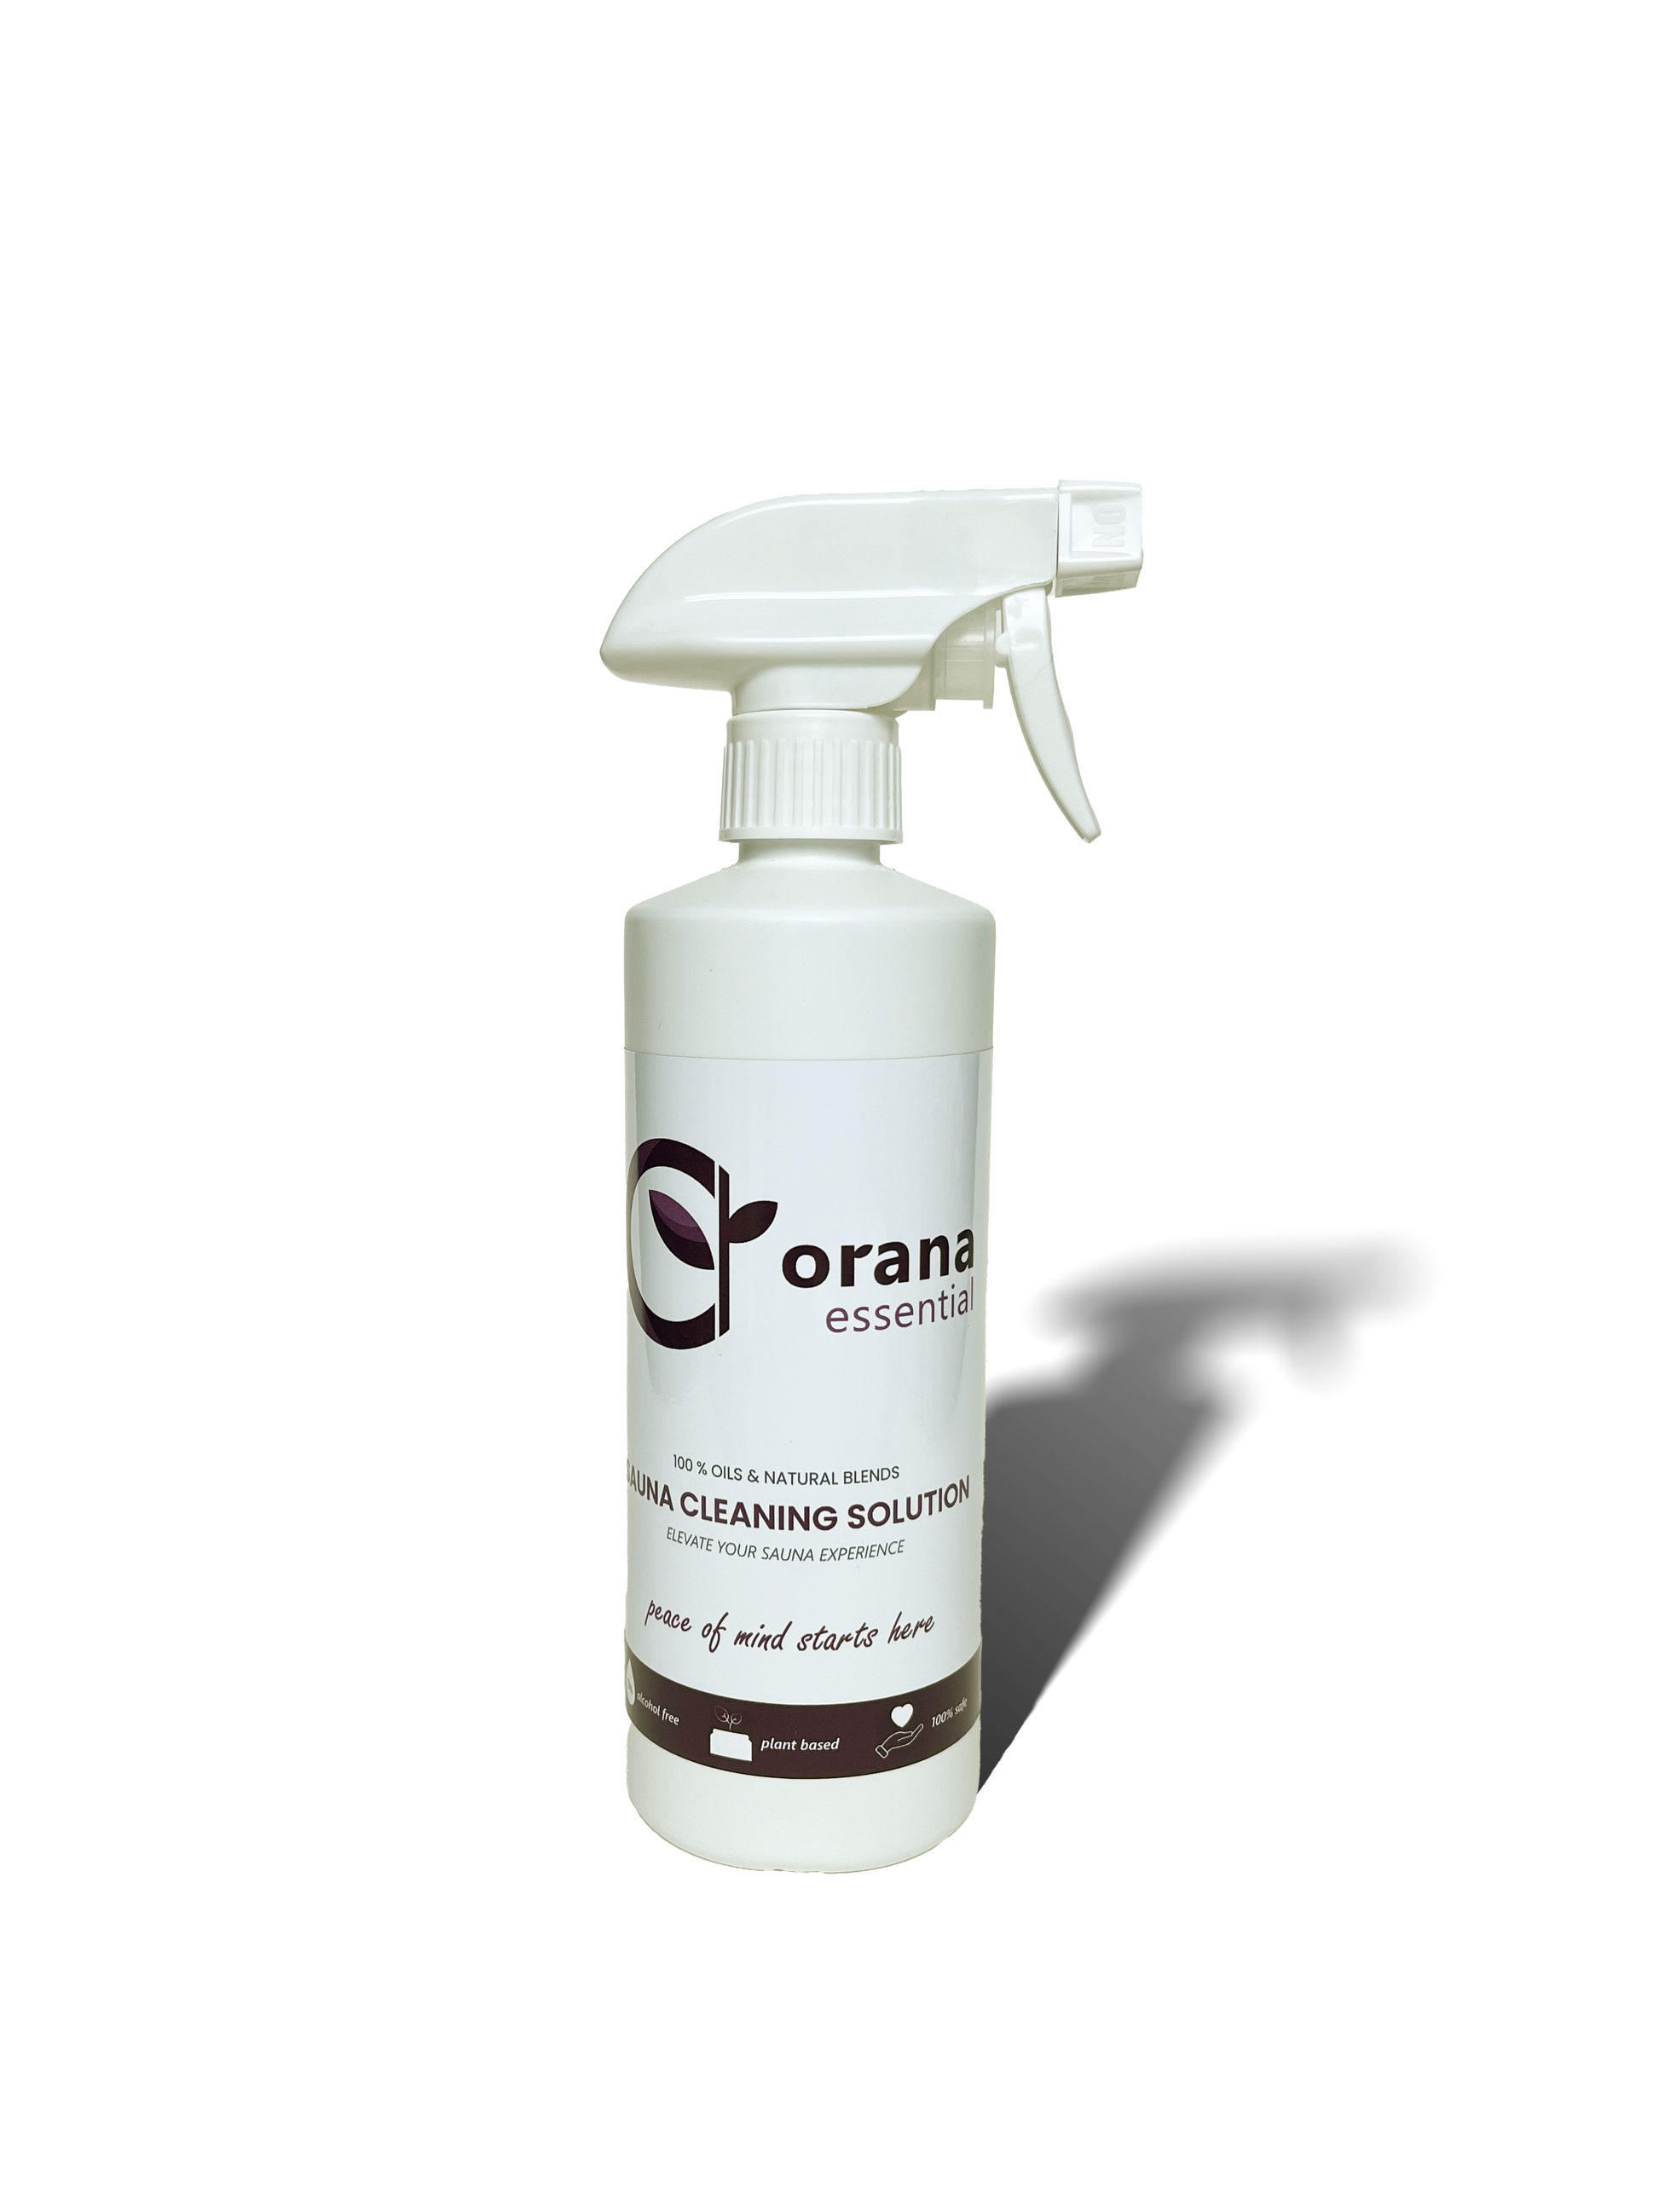 Picture of the Sauna cleaning solution, green product, eco friendly, chemical free. Best for wood cleaning. This is the front of the bottle